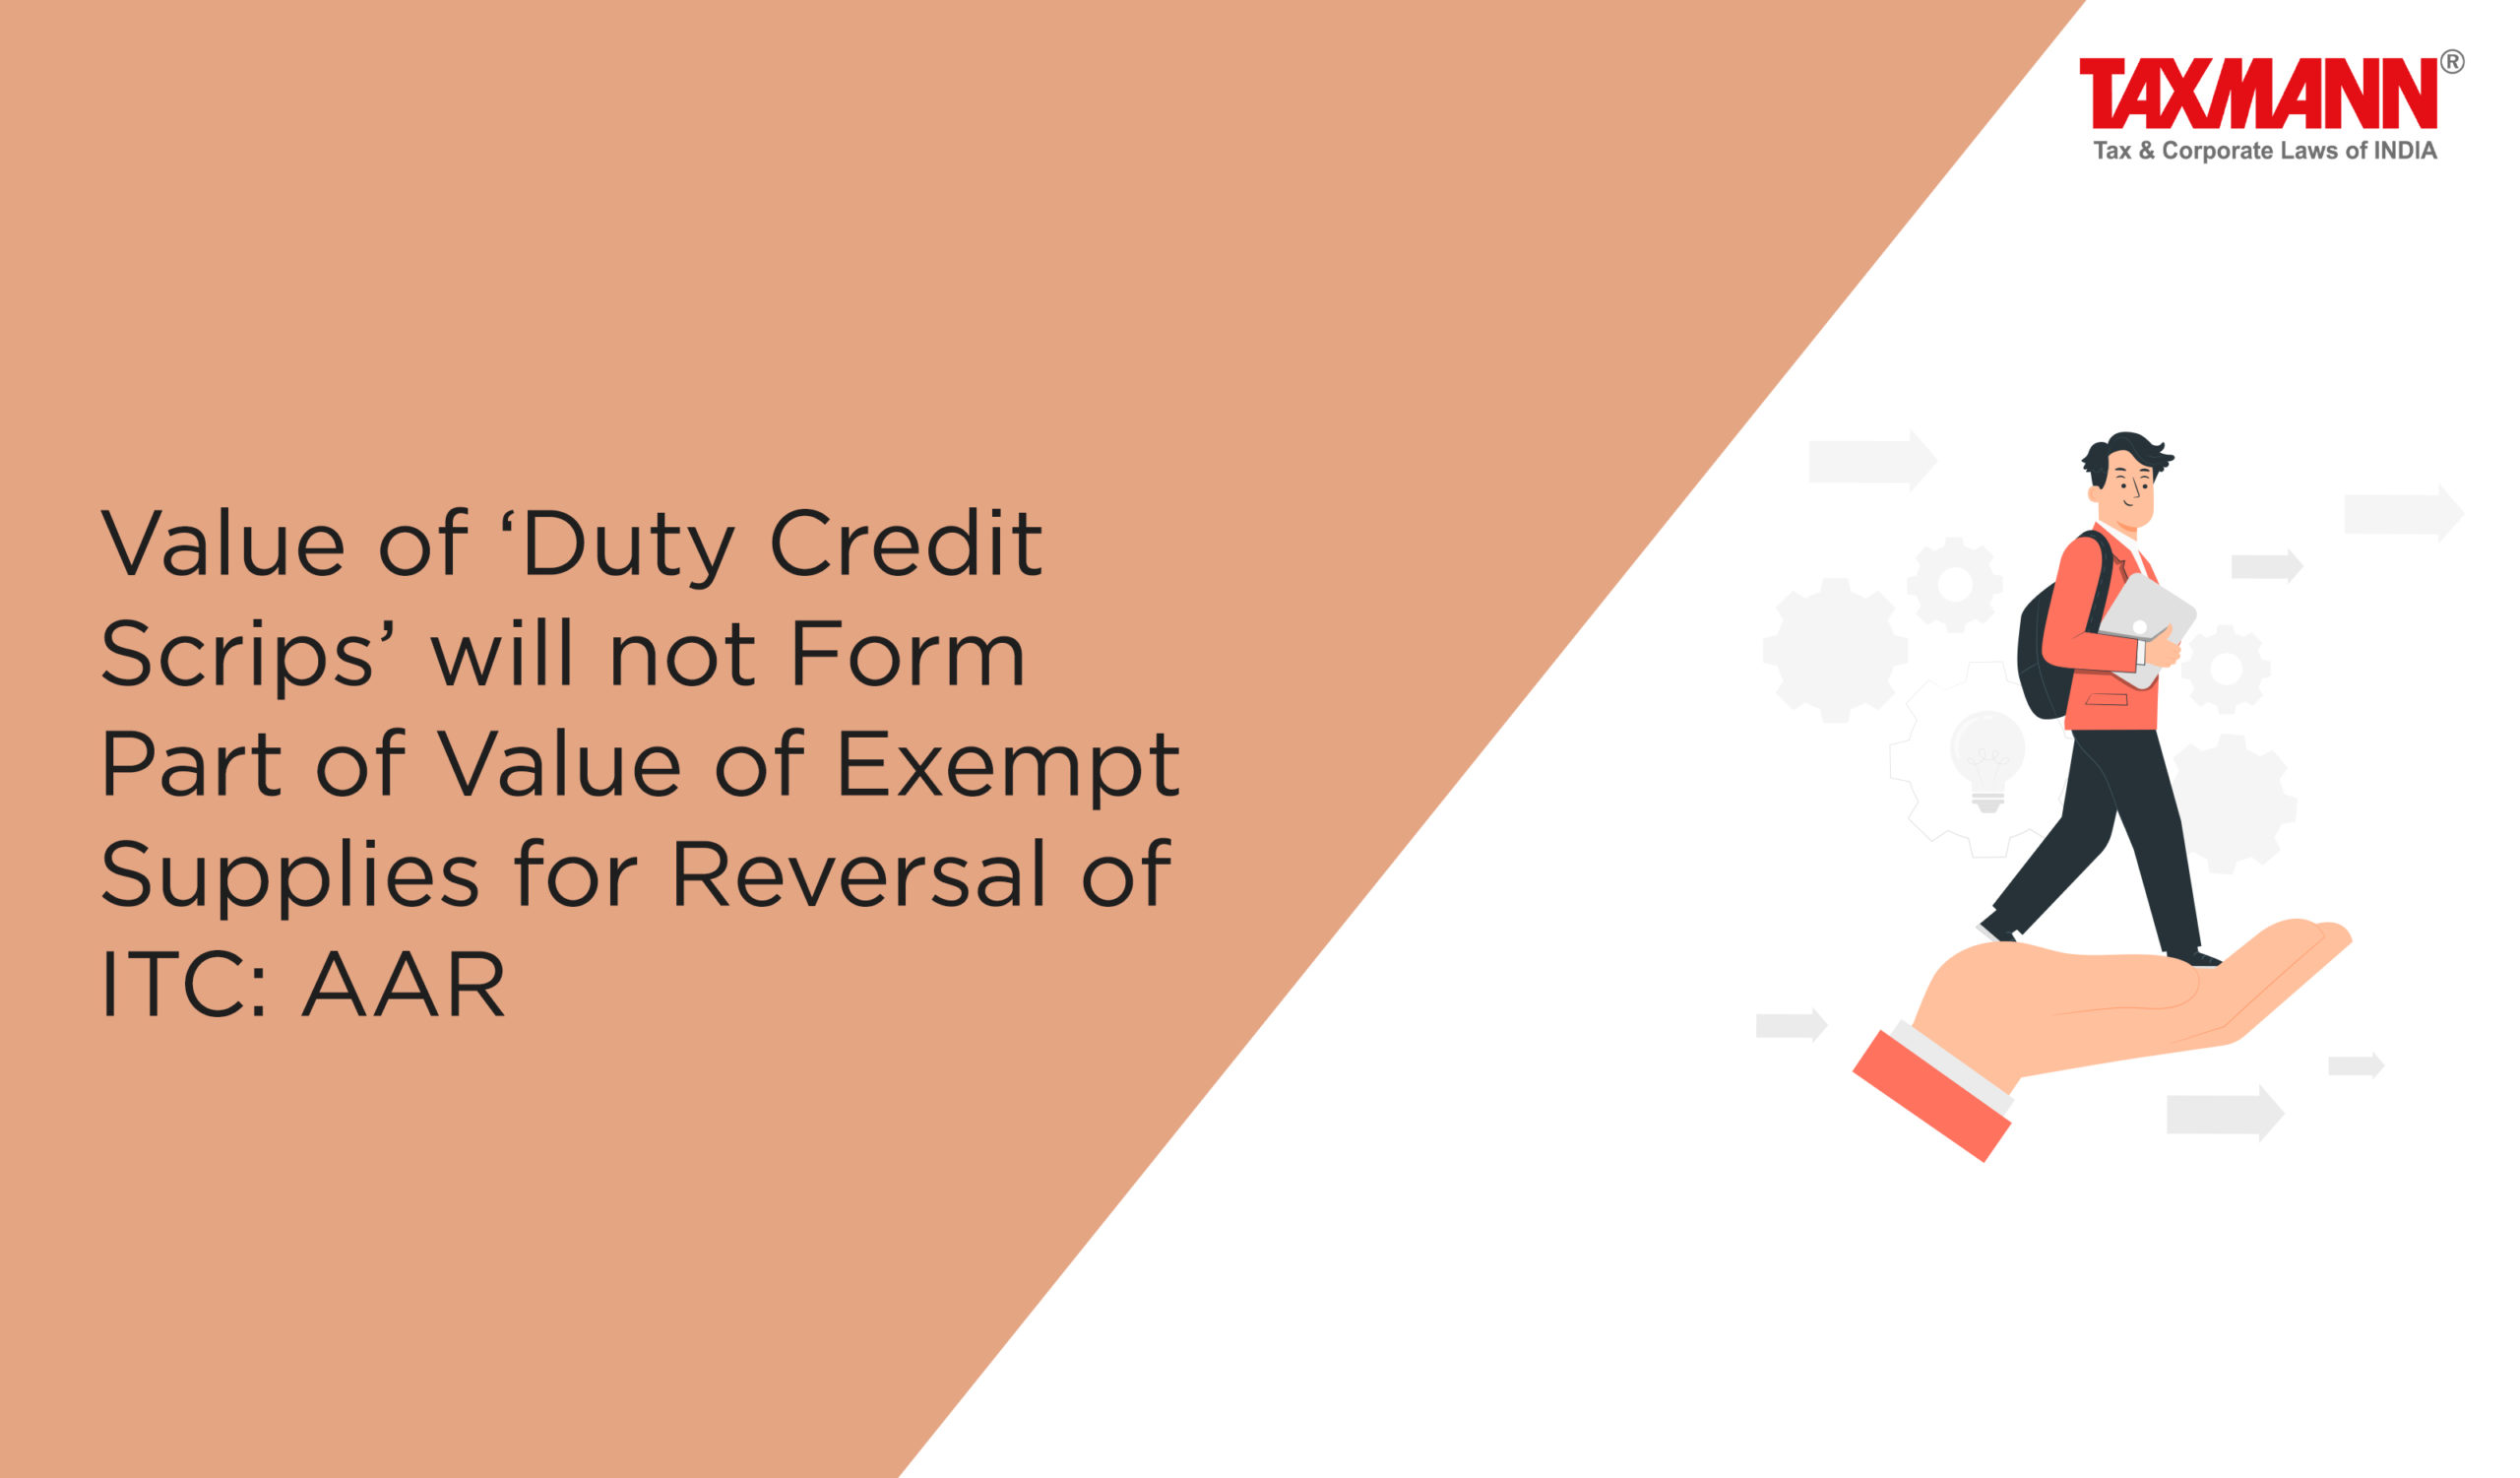 Value of Duty Credit Scrips